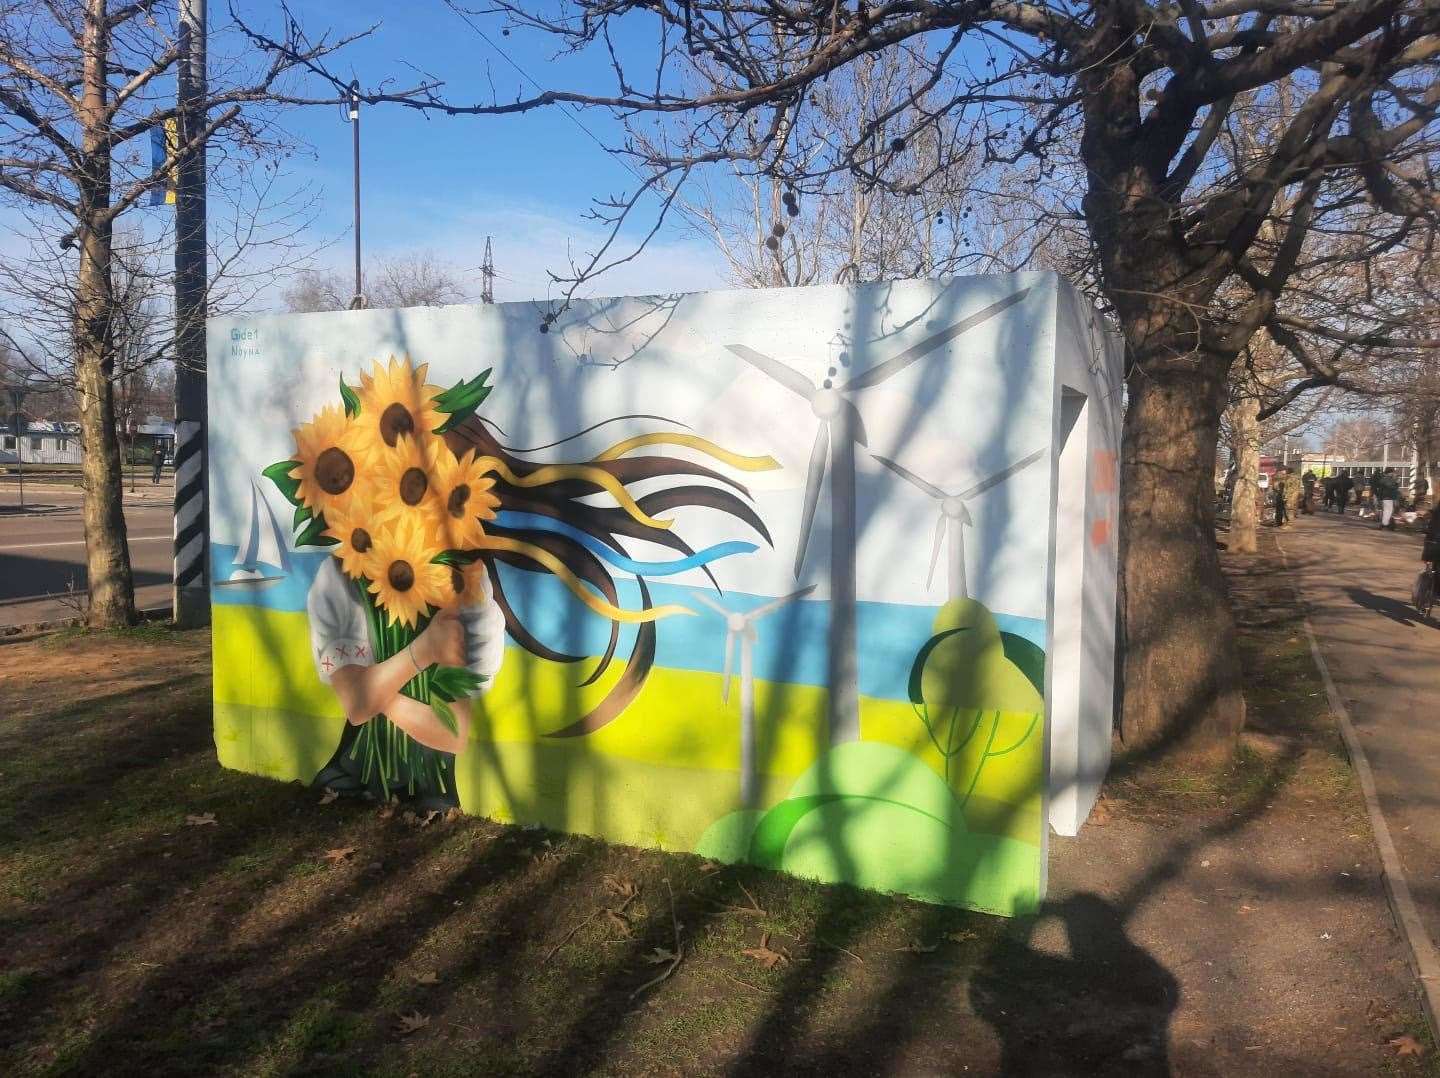 Decorated bomb shelters in Ukraine